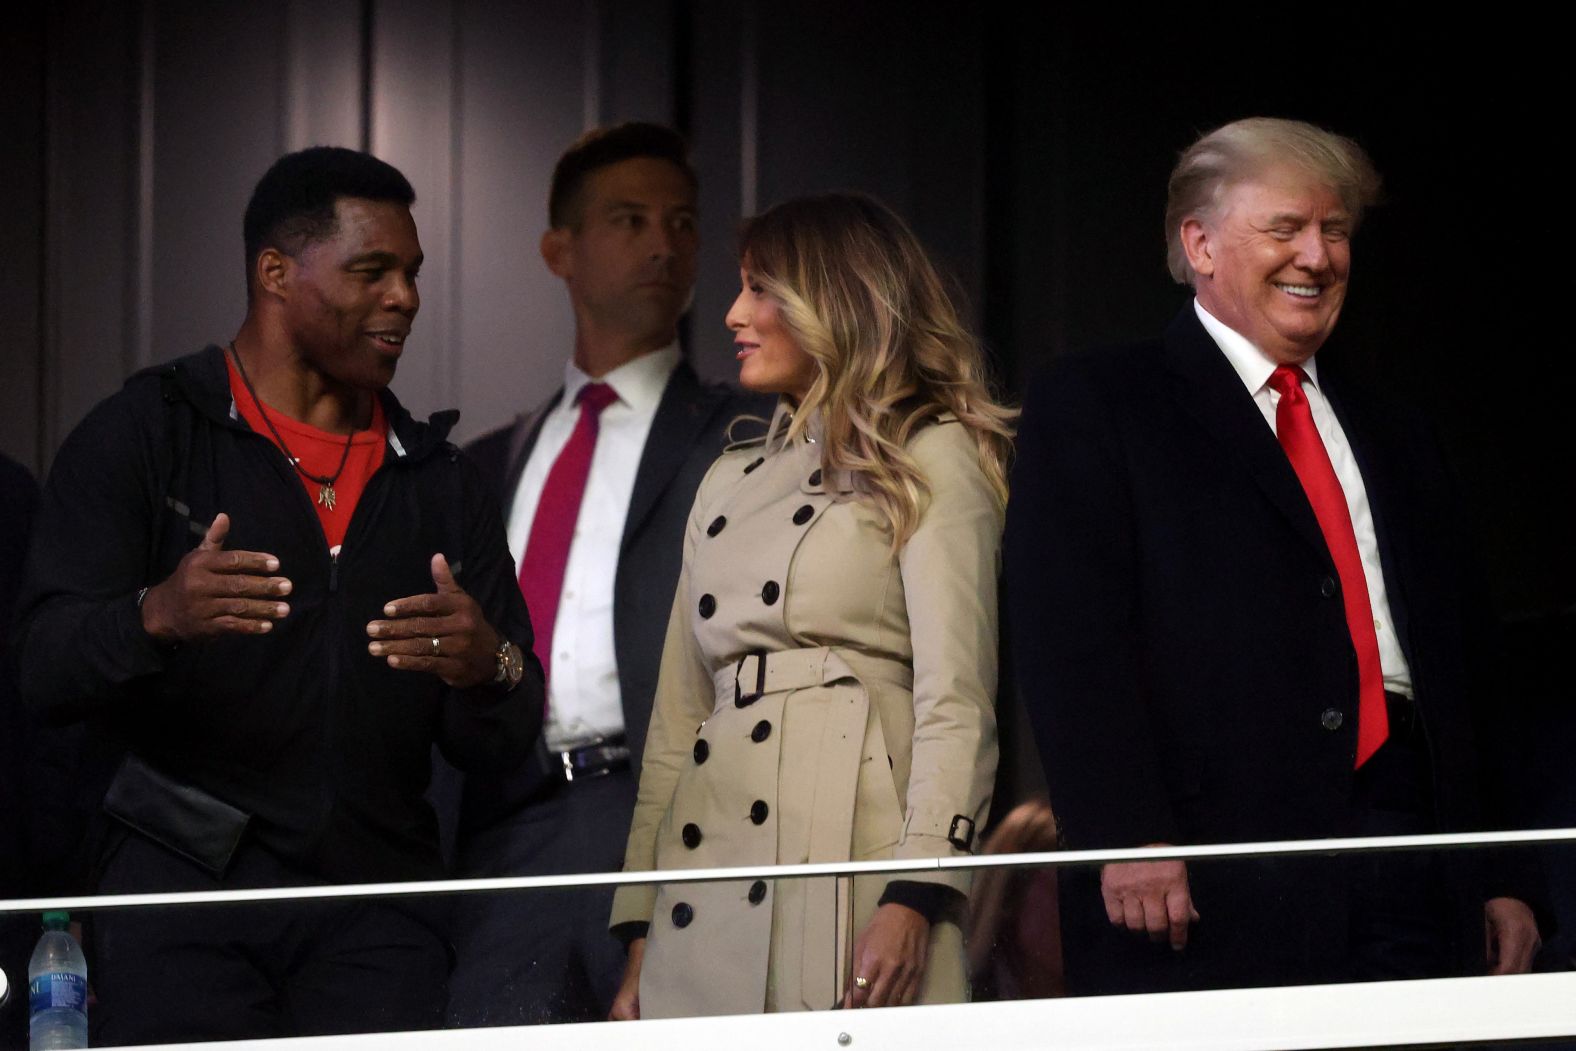 Former NFL star Herschel Walker, who is <a href="index.php?page=&url=https%3A%2F%2Fwww.cnn.com%2F2021%2F10%2F27%2Fpolitics%2Fherschel-walker-mitch-mcconnell-endorsement-georgia%2Findex.html" target="_blank">running for a US Senate seat in Georgia,</a> interacts with former first lady Melania Trump and <a href="index.php?page=&url=https%3A%2F%2Fwww.cnn.com%2Fsport%2Flive-news%2Fworld-series-2021-braves-astros-game-4%2Fh_a1ea7d6db9180698e548450bf54bed0e" target="_blank">former President Donald Trump</a> prior to Game 4. Trump's support of Walker, which came initially over reservations from much of the GOP establishment, has given the former running back a boost ahead of next year's primary.